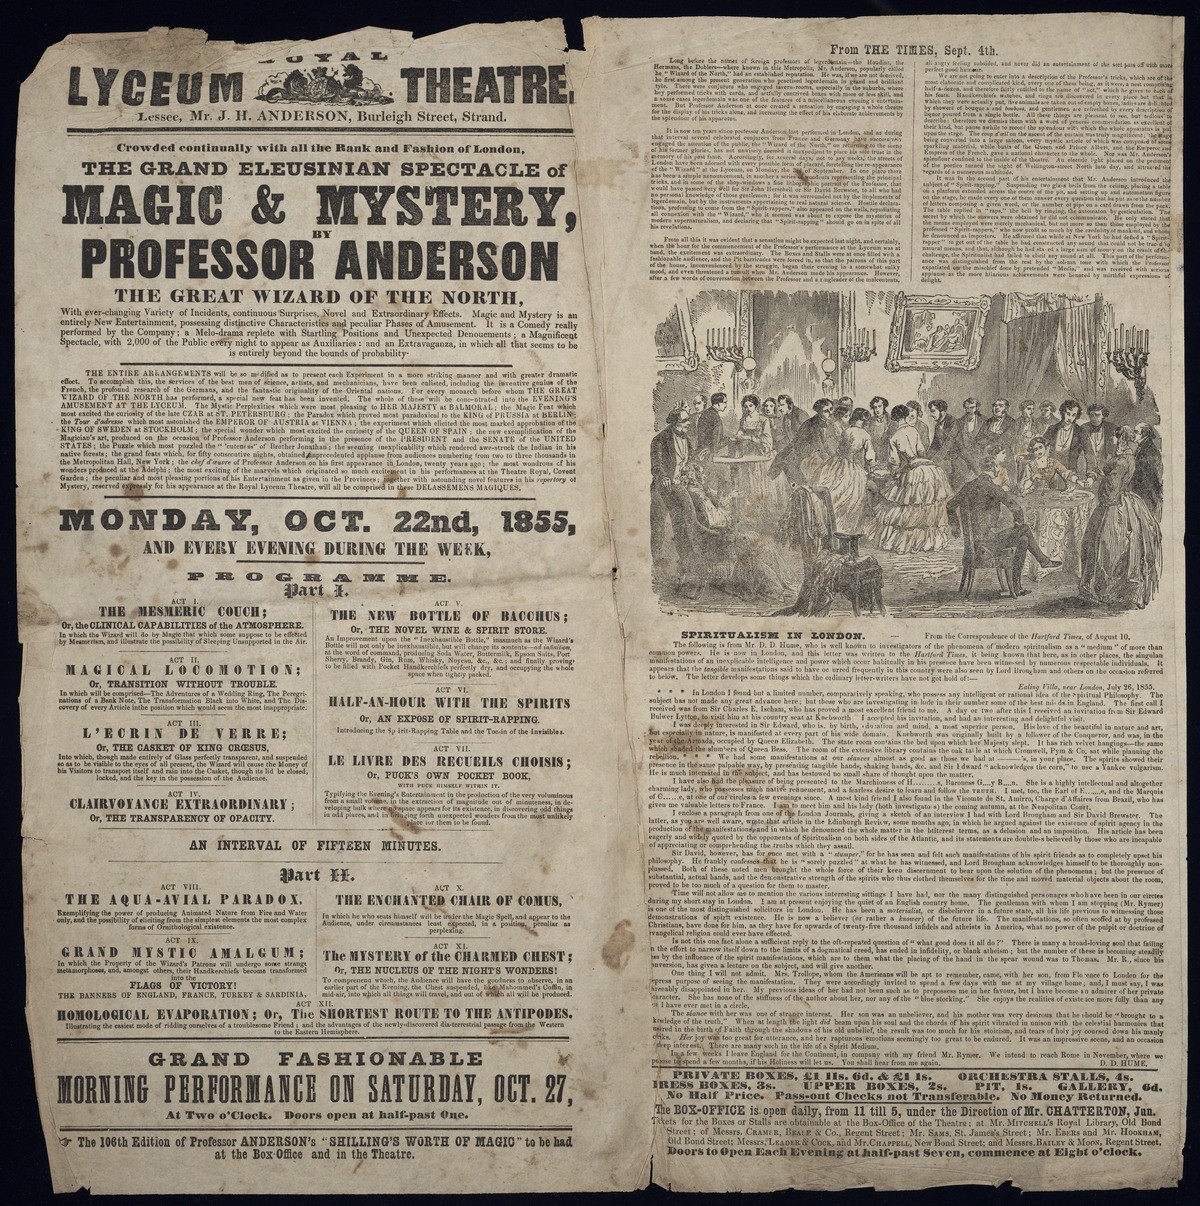 Playbill for an evening's entertainment at the Royal Lyceum Theatre, London, England: The Grand Eleusinian Spectacle of Magic & Mystery, by Professor Anderson, The Great Wizard of The North